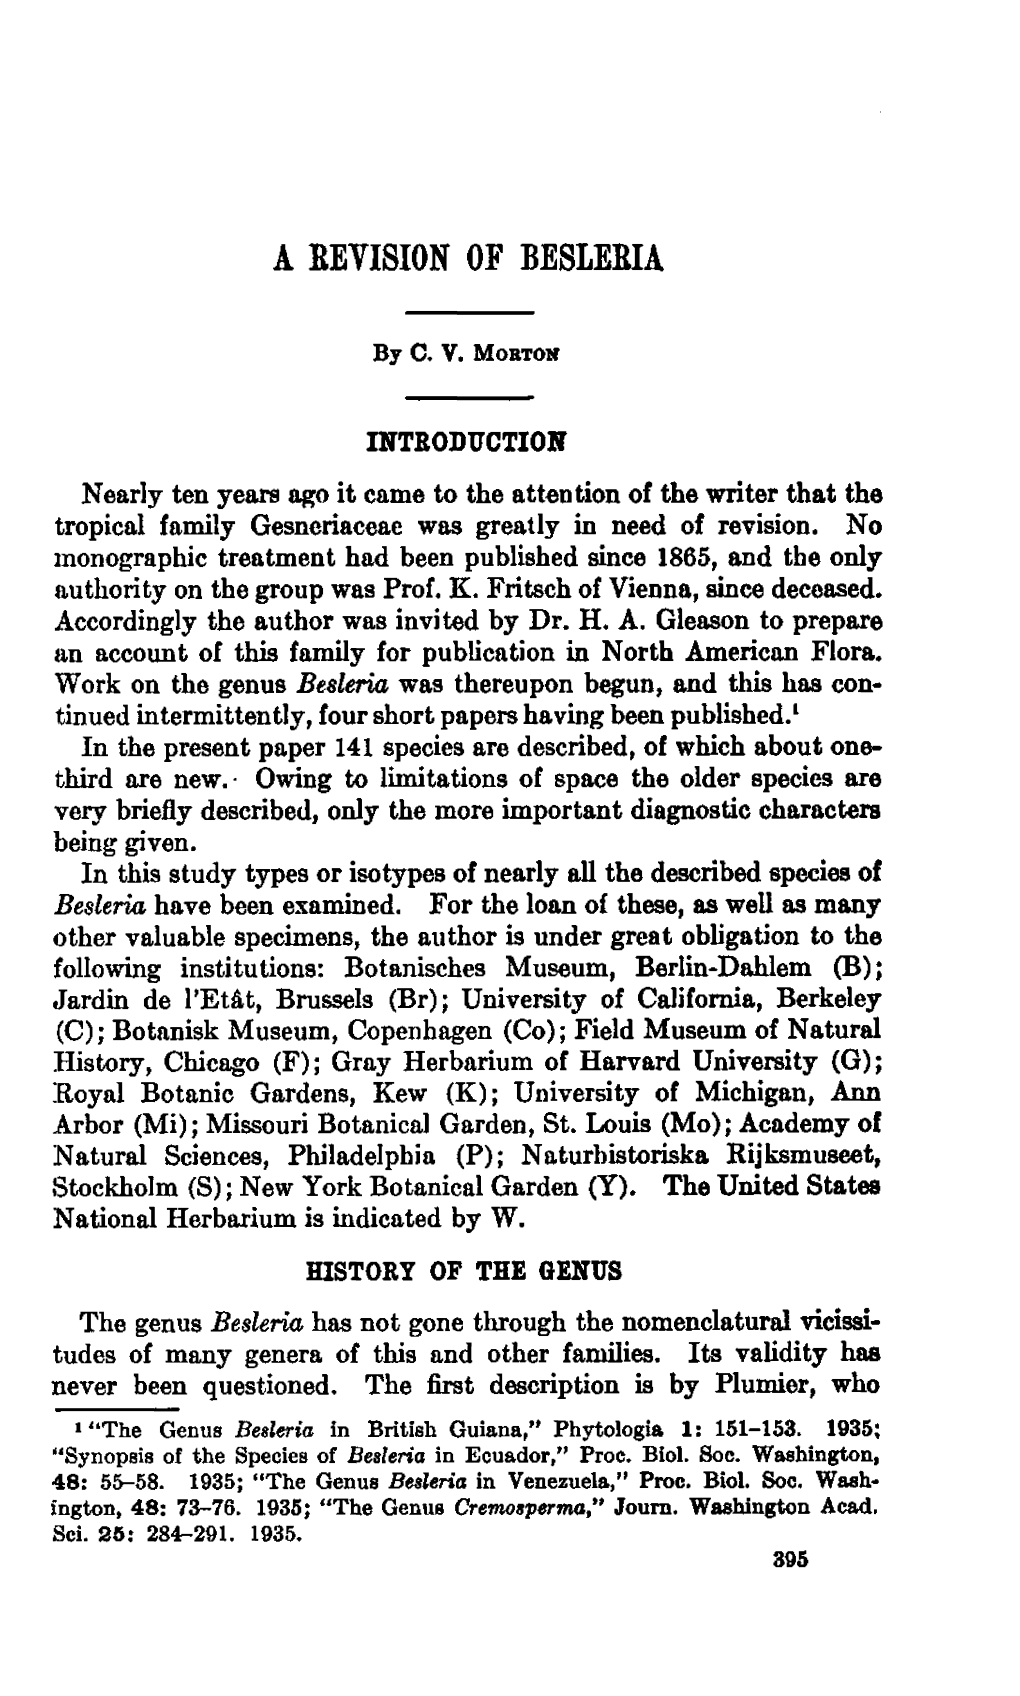 A REVISION of BESLERIA by C. V. Morton INTRODUCTION Nearly Ten